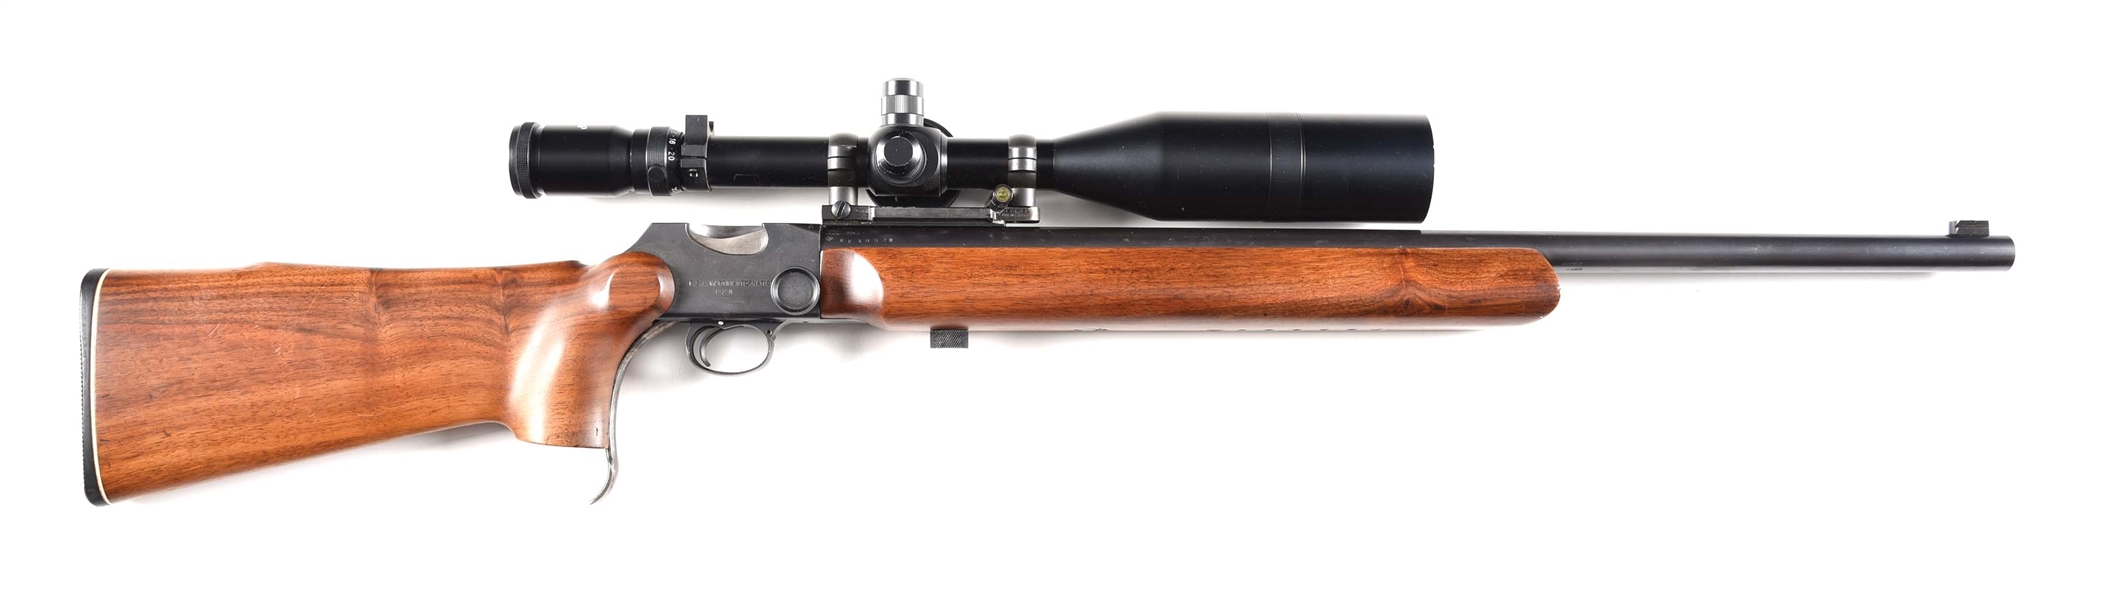 (M) BSA MARTINI TARGET RIFLE IN .22 LR WITH TASCO SCOPE.